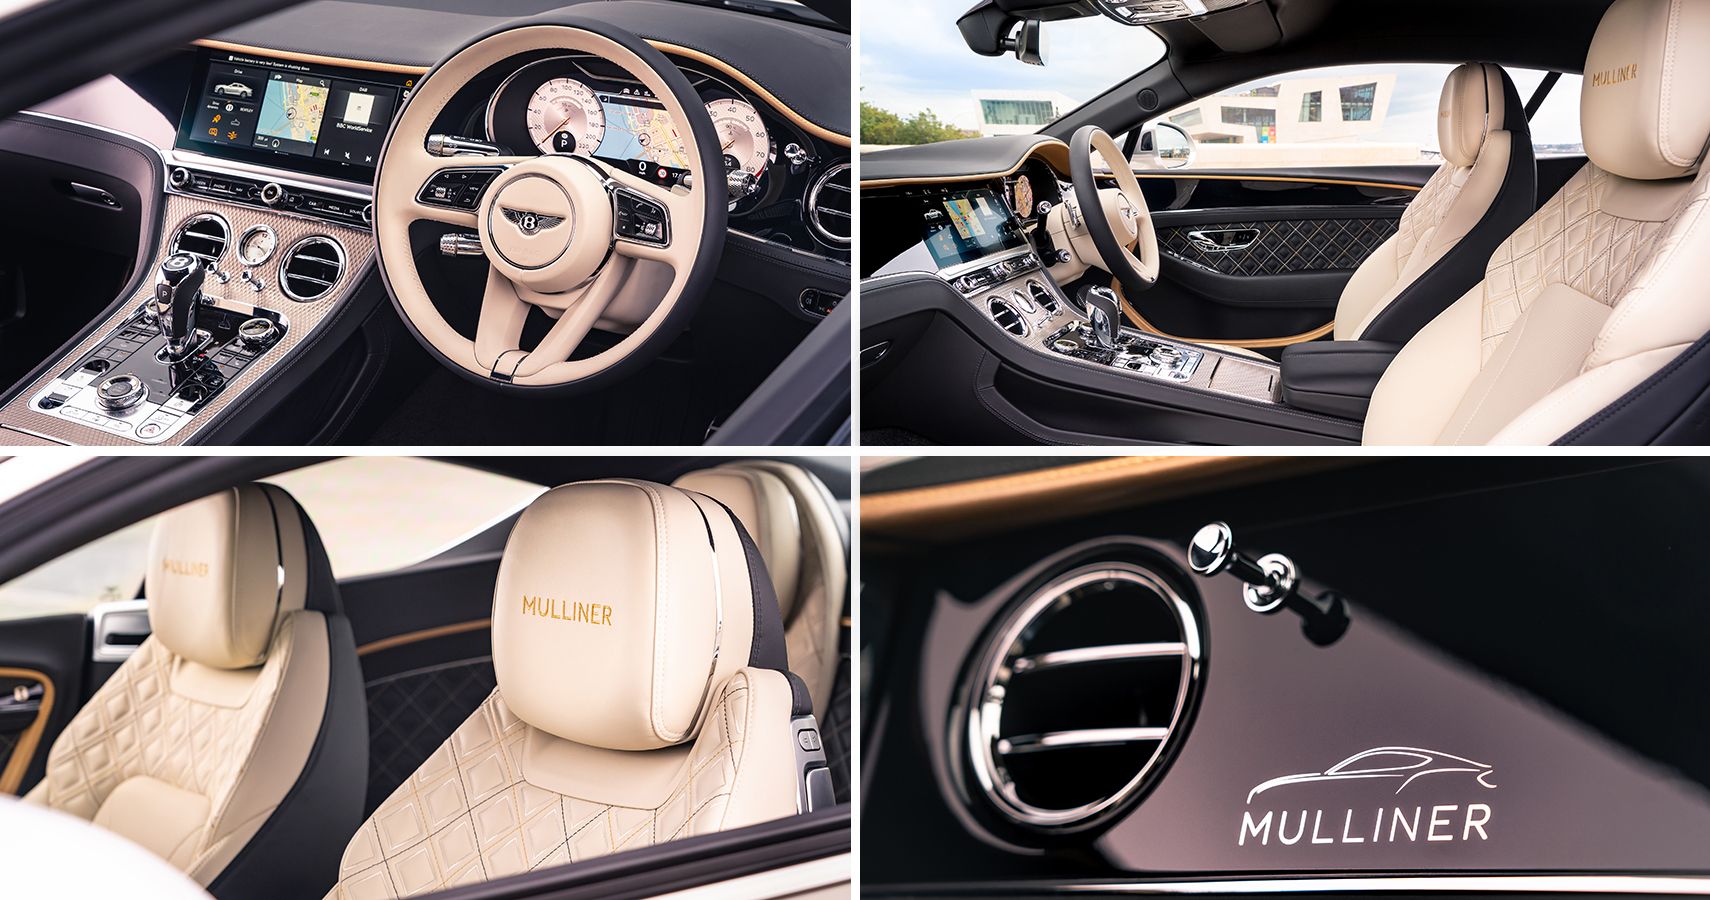 Continental GT Mulliner coupe interior